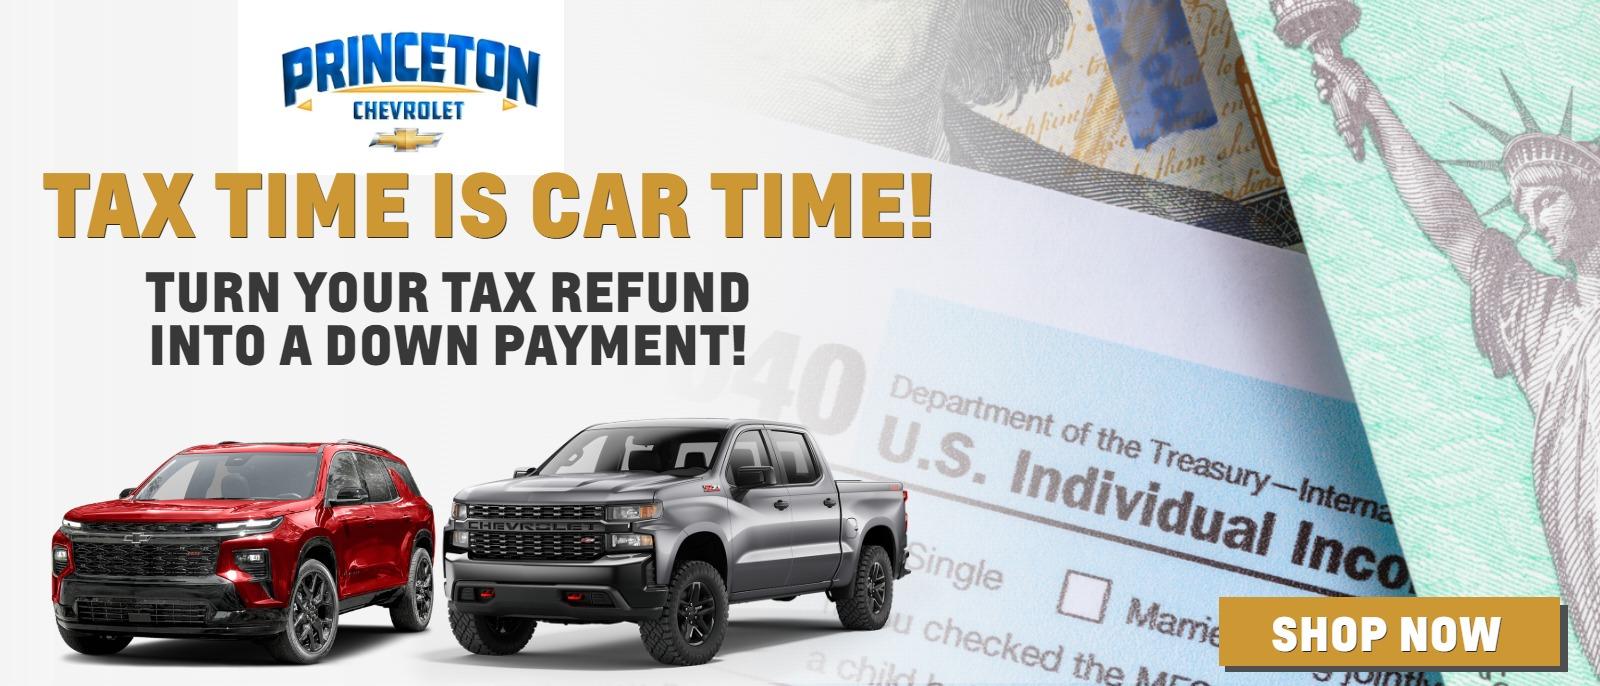 Tax Time is Car Time!

Turn Your Tax Refund Into a Down Payment!